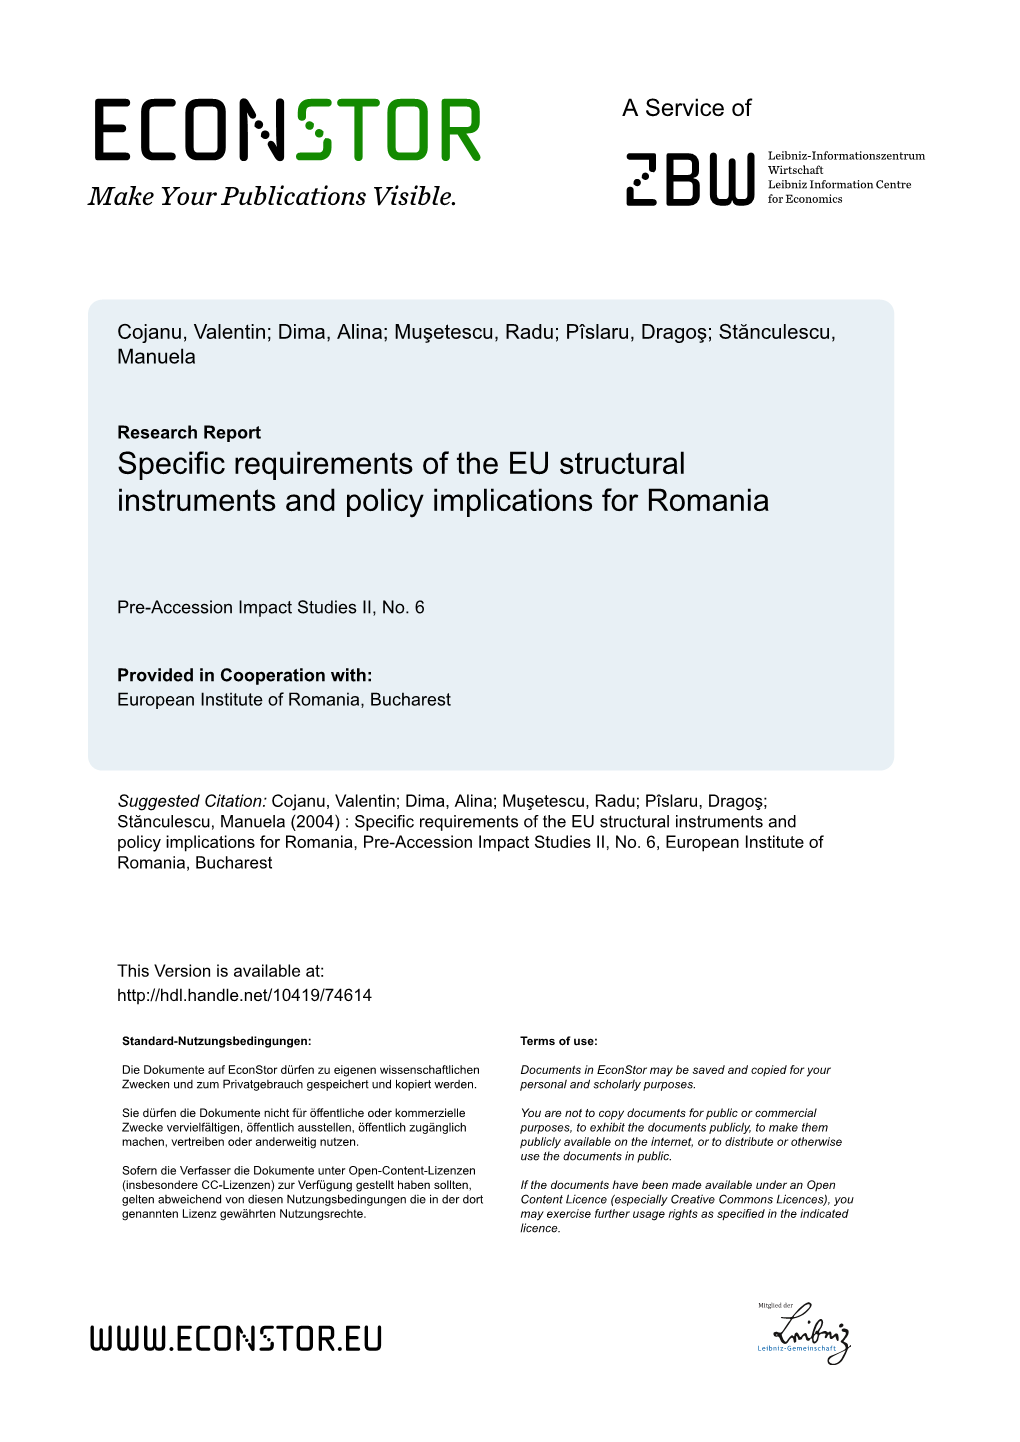 Specific Requirements of the EU Structural Instruments and Policy Implications for Romania